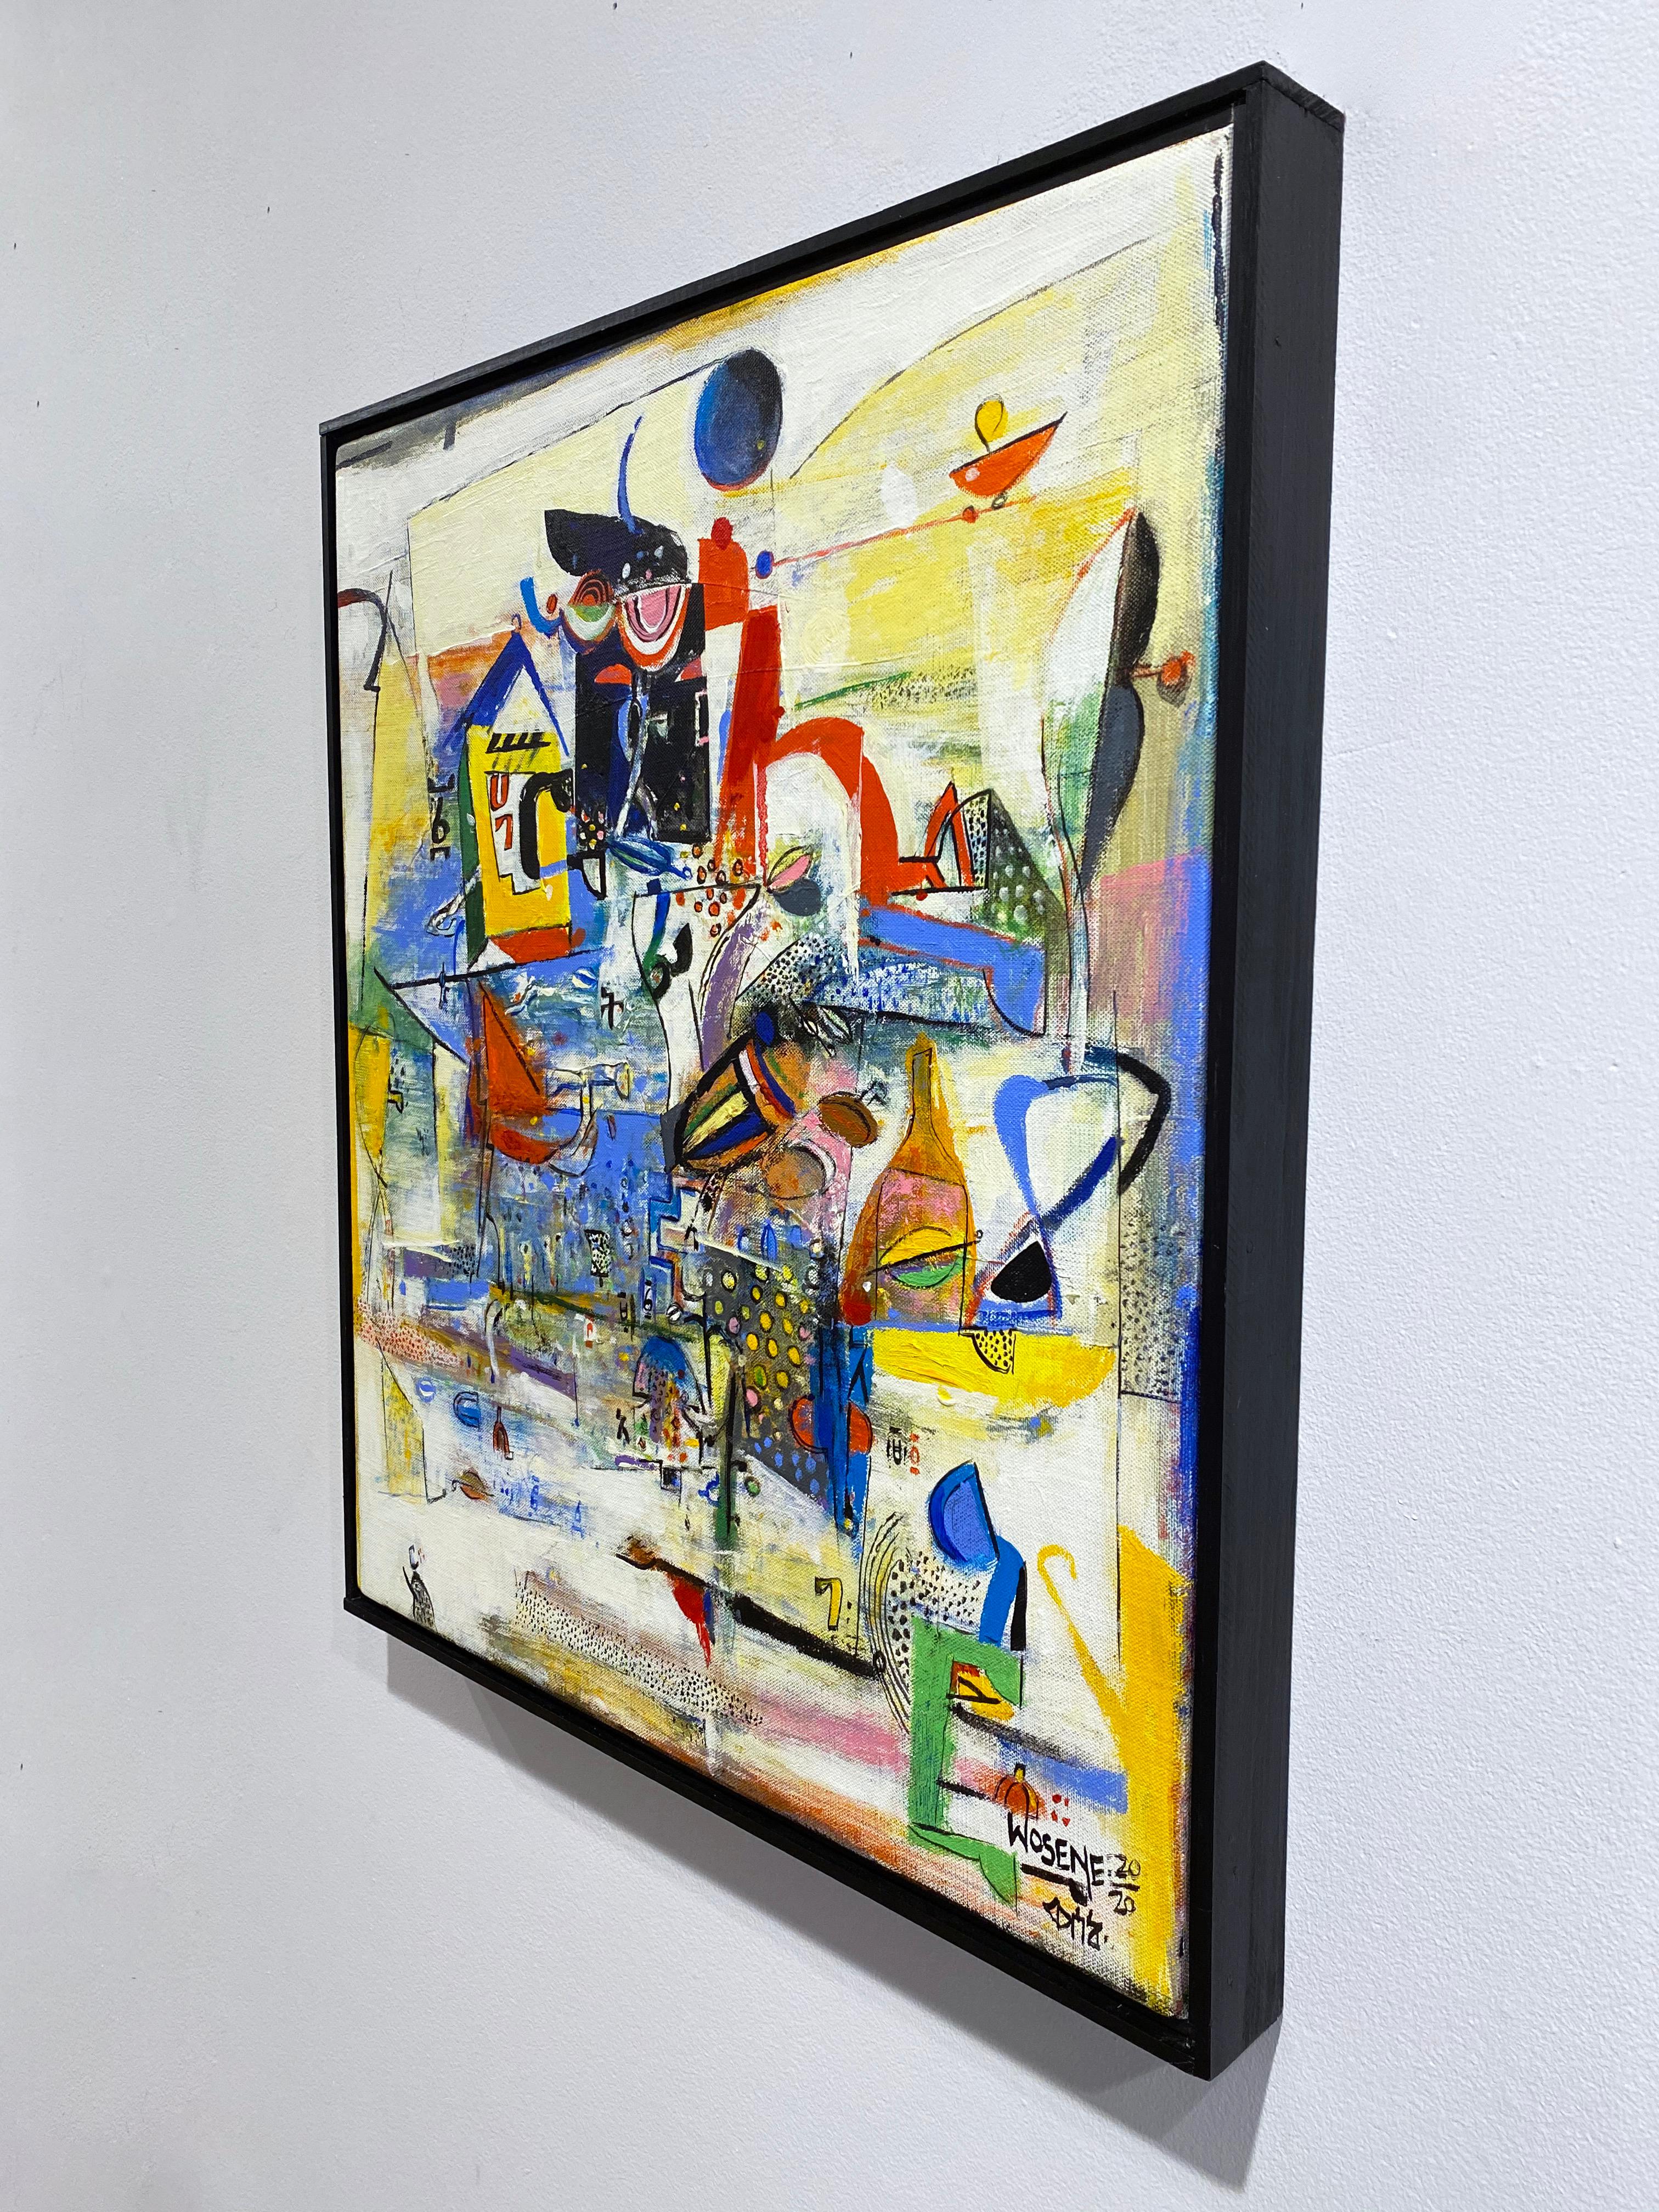 'Sketch for a Hat V' by Wosene Worke Kosrof , 2020. Acrylic on linen, 22 x 19 in. This abstract painting features primary colors including red, yellow, purple, orange and black and is framed in a simple black wood frame. 

 Contemporary